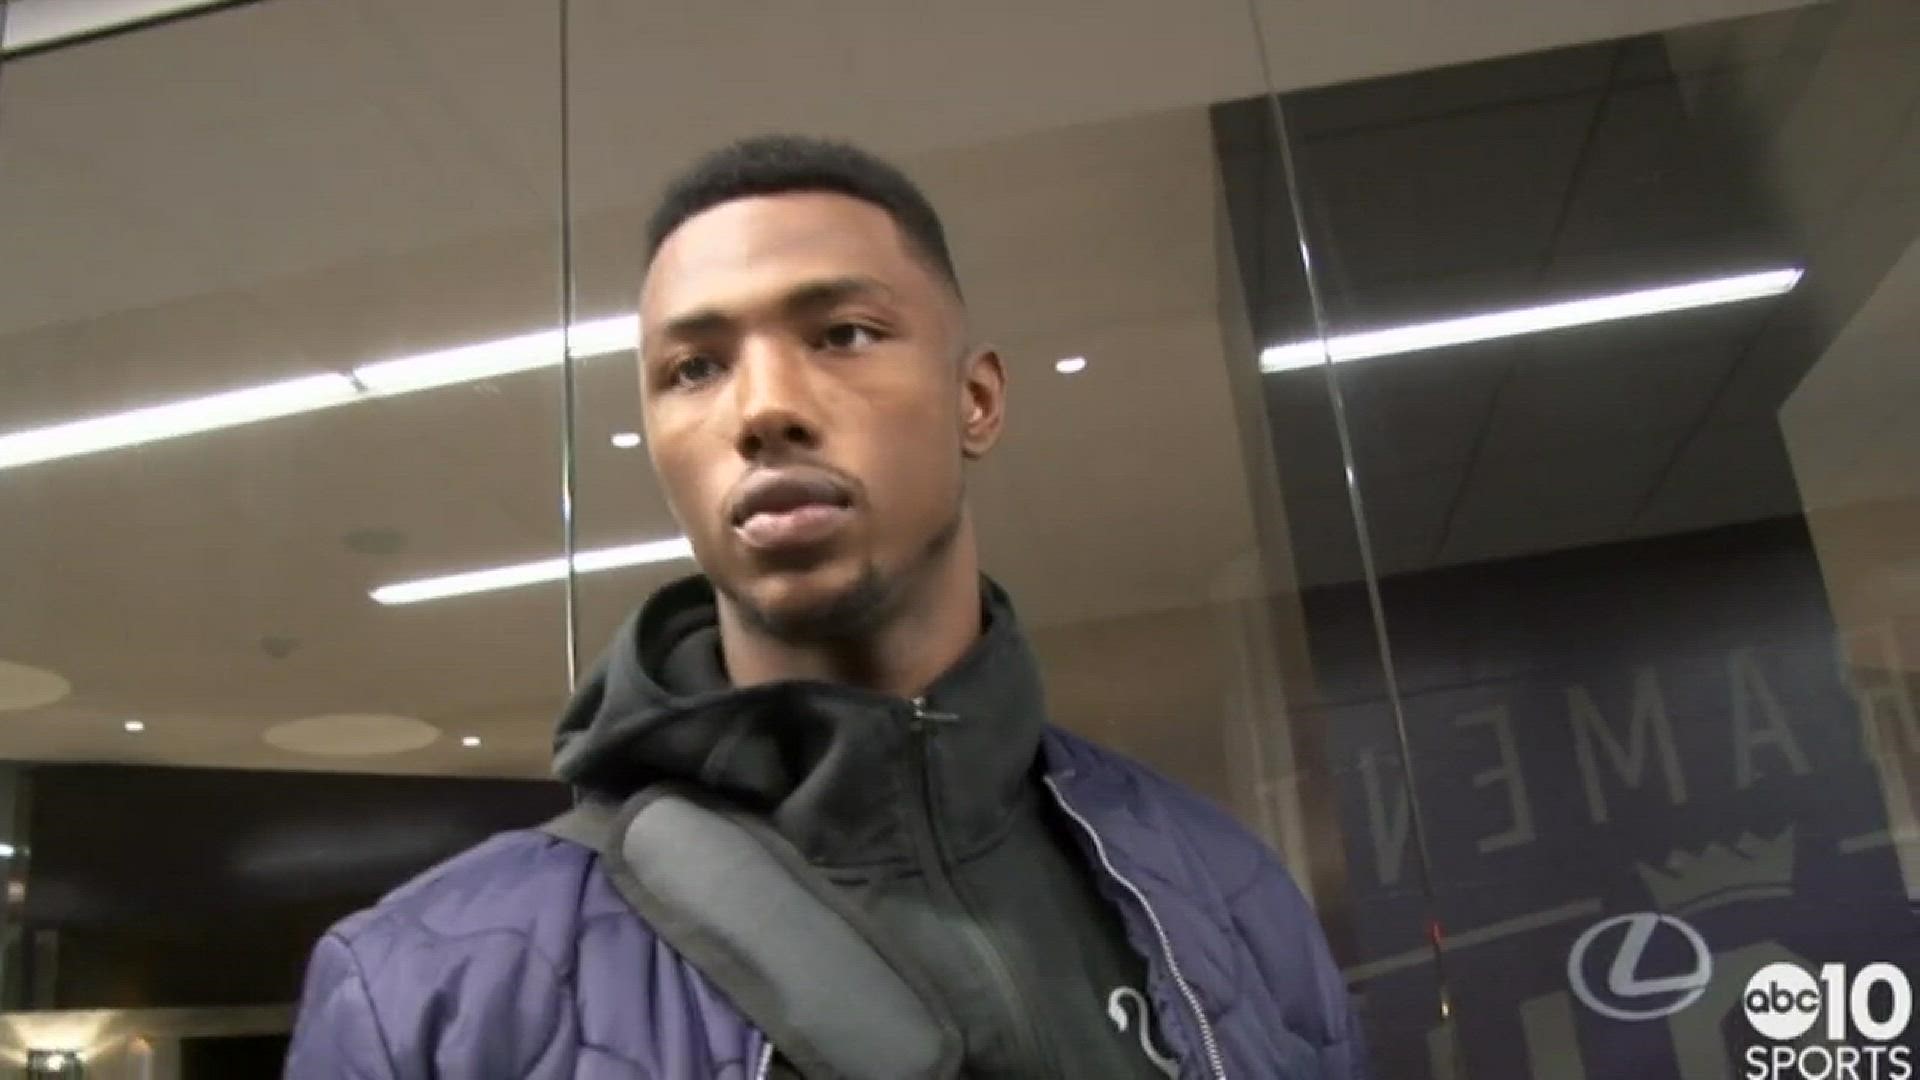 Kings rookie forward Harry Giles speaks to ABC10's Sean Cunningham about the team's decision to hold him out of action for the remainder of the season to allow him to continue to develop with the focus to return in July for NBA Summer League.